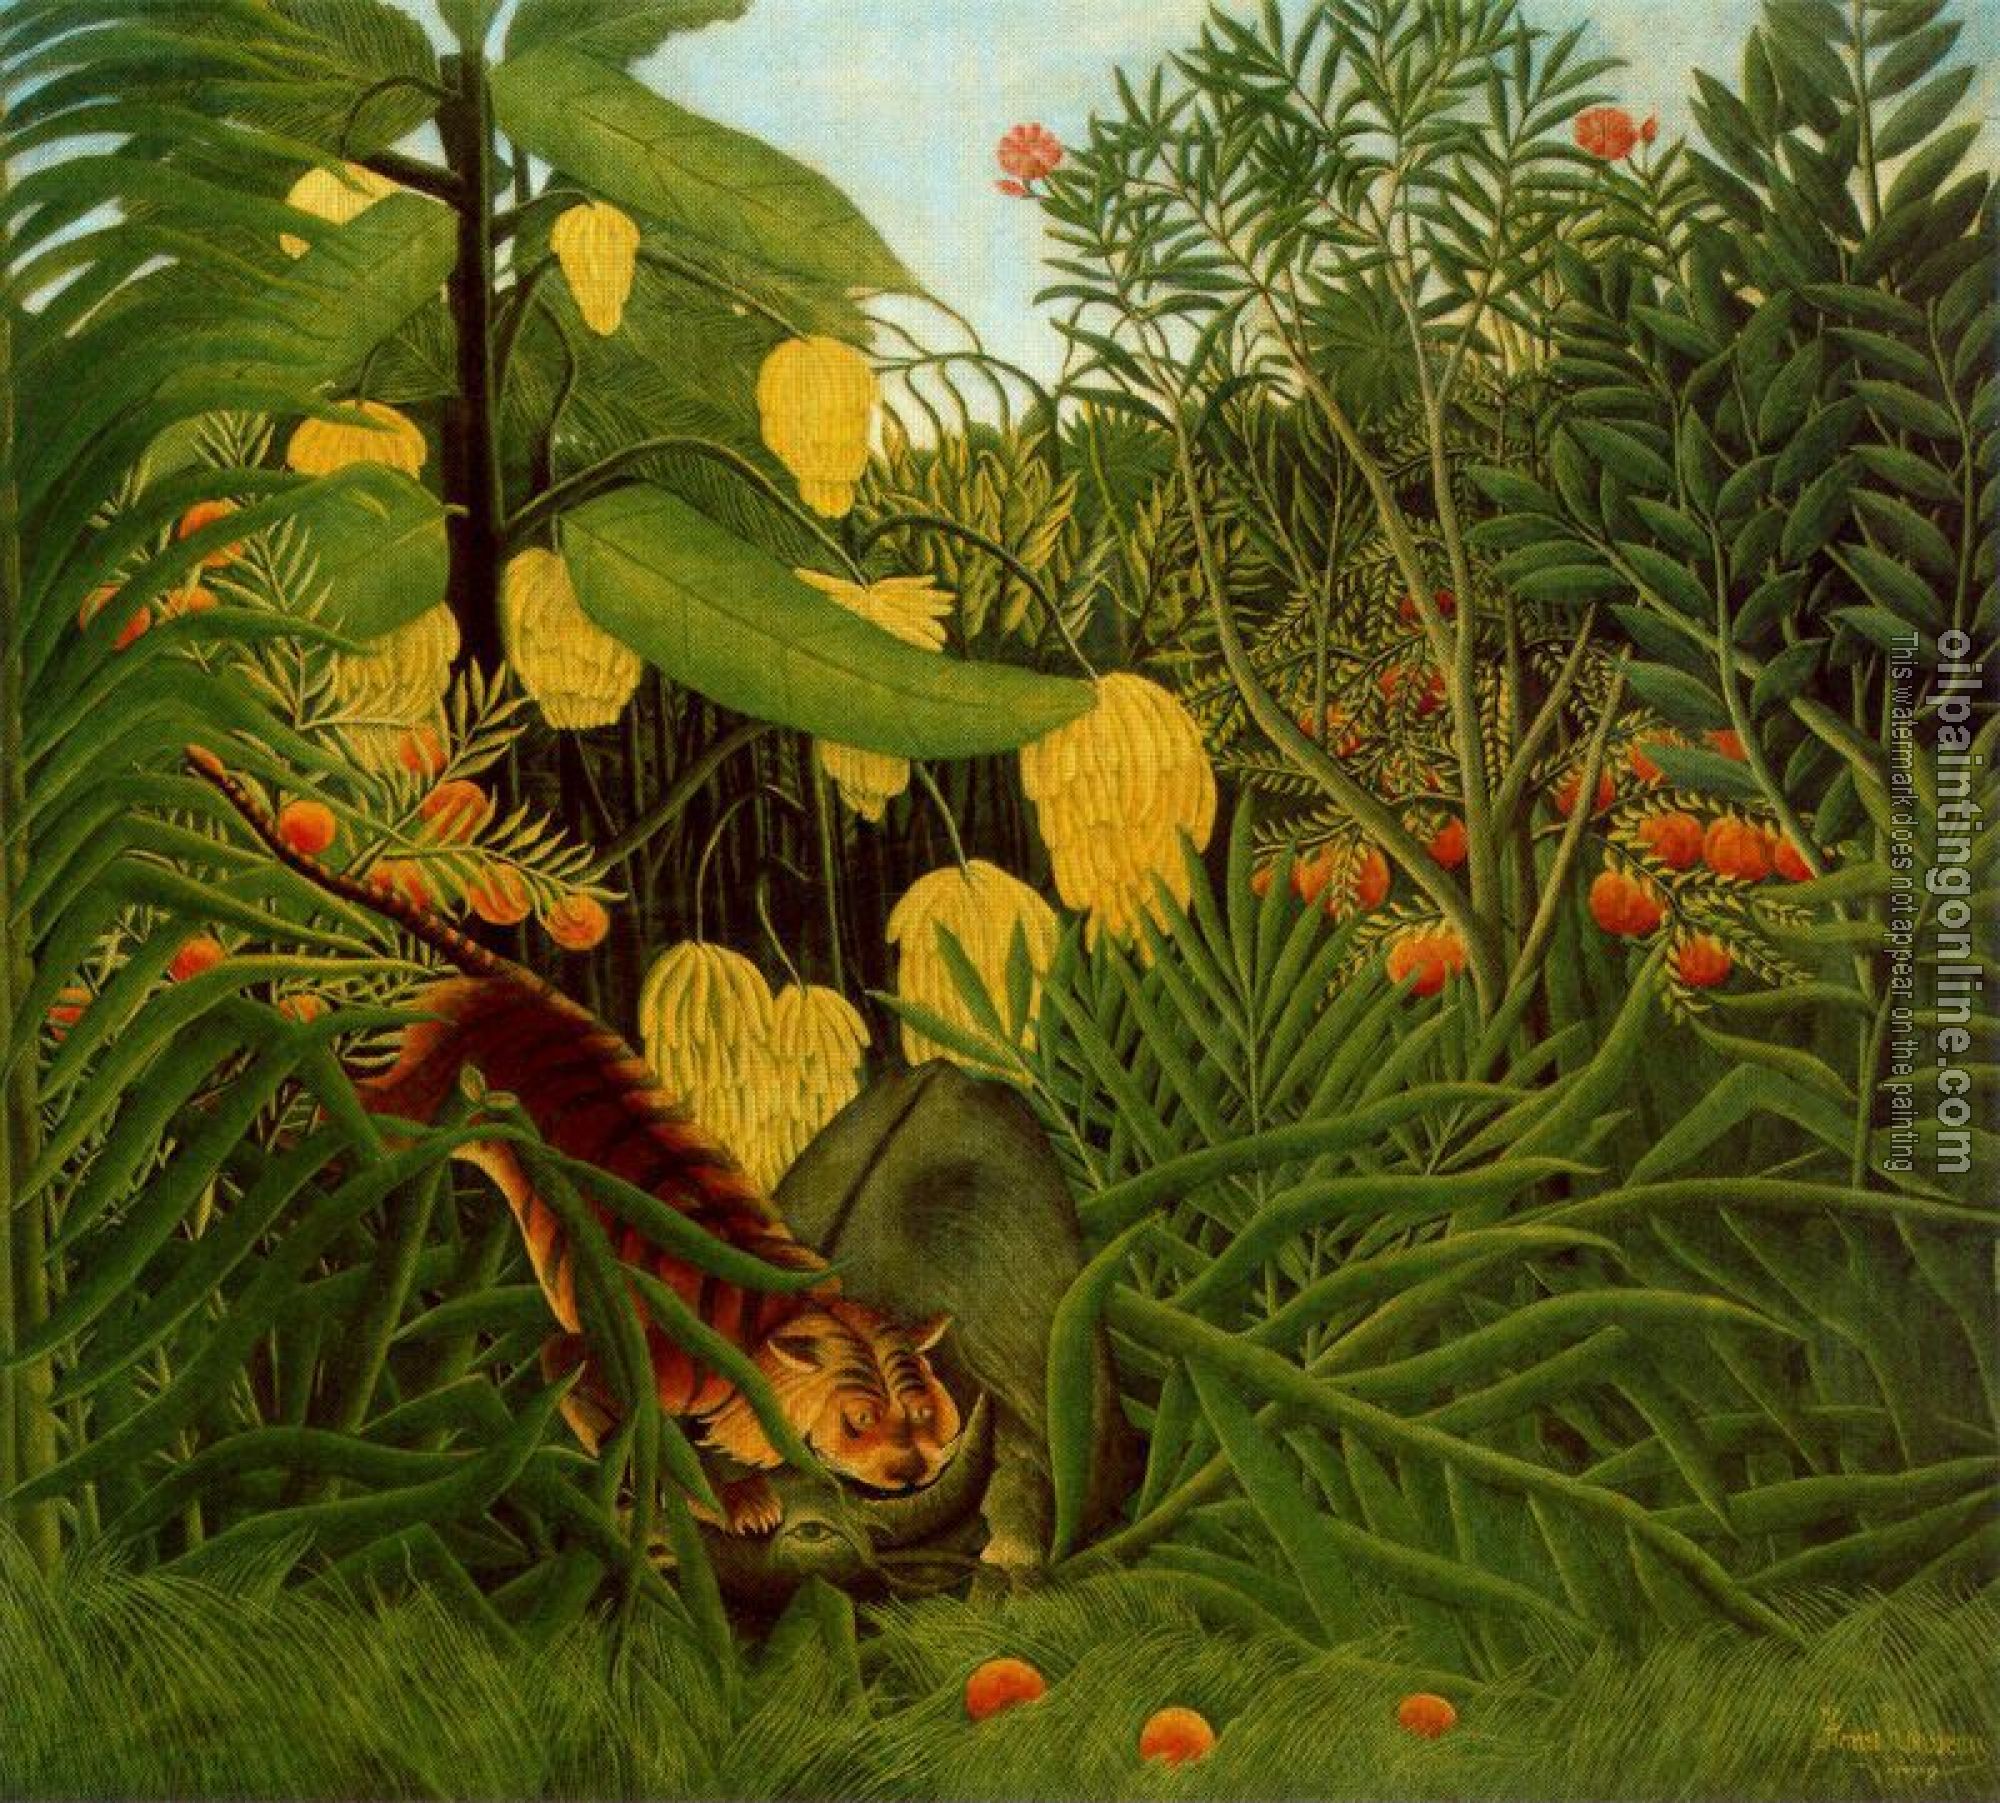 Henri Rousseau - Fight Between a Tiger and a Buffalo